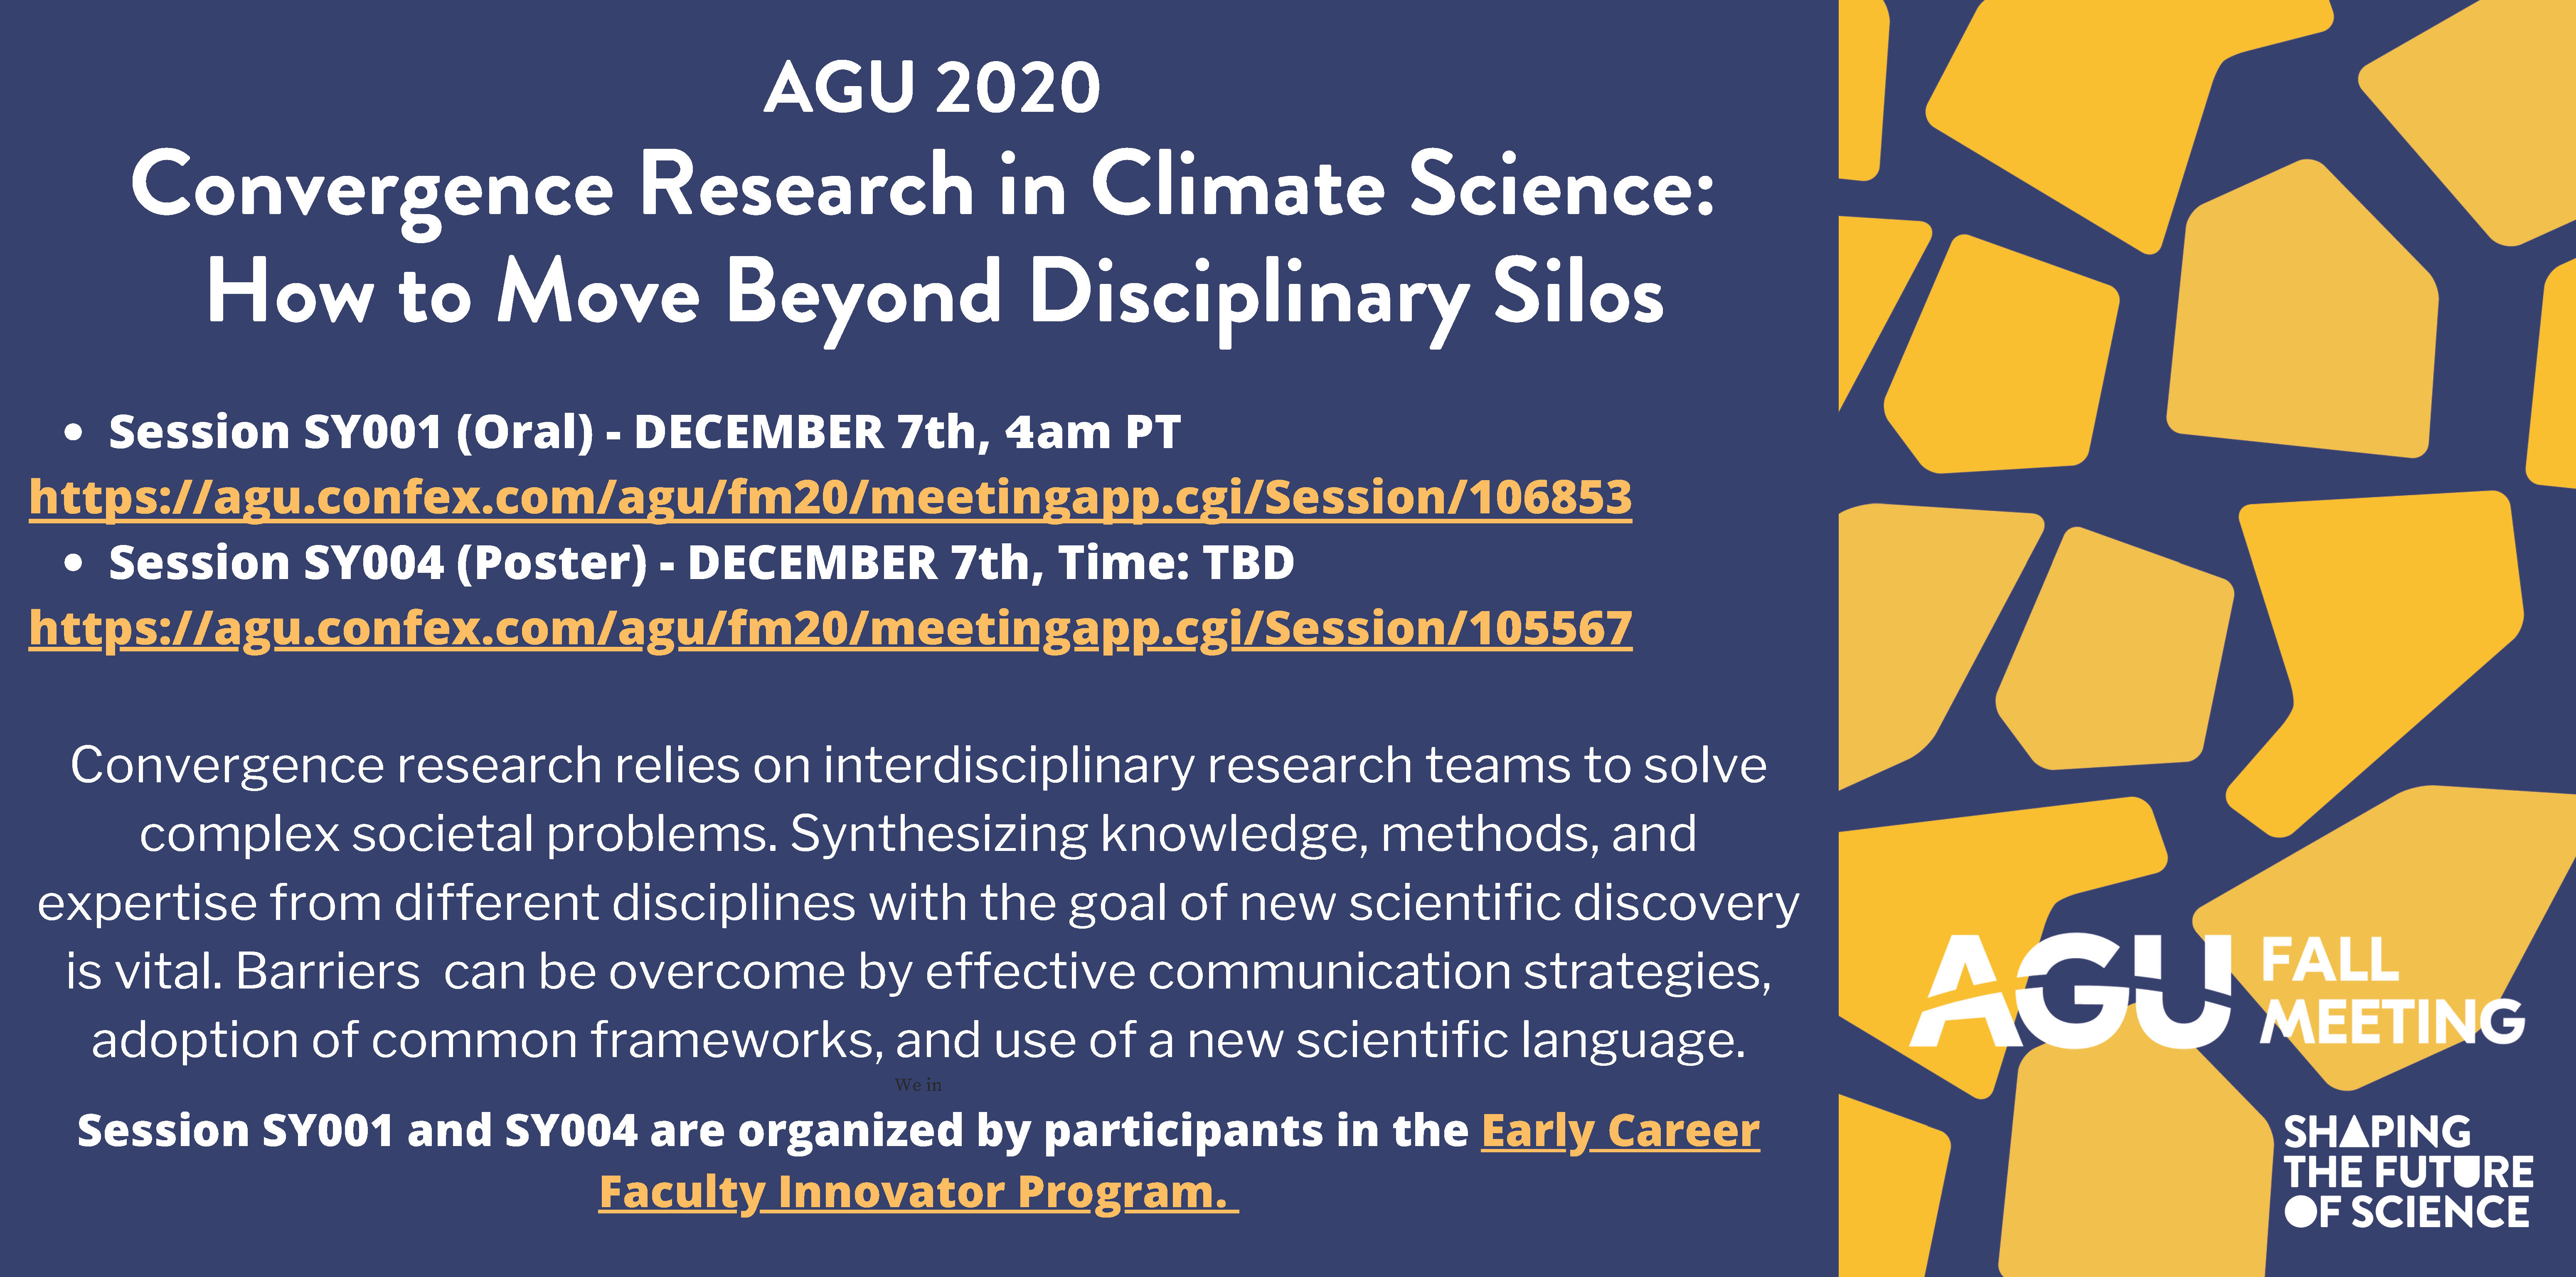 AGU 2020 National Center for Atmospheric Research